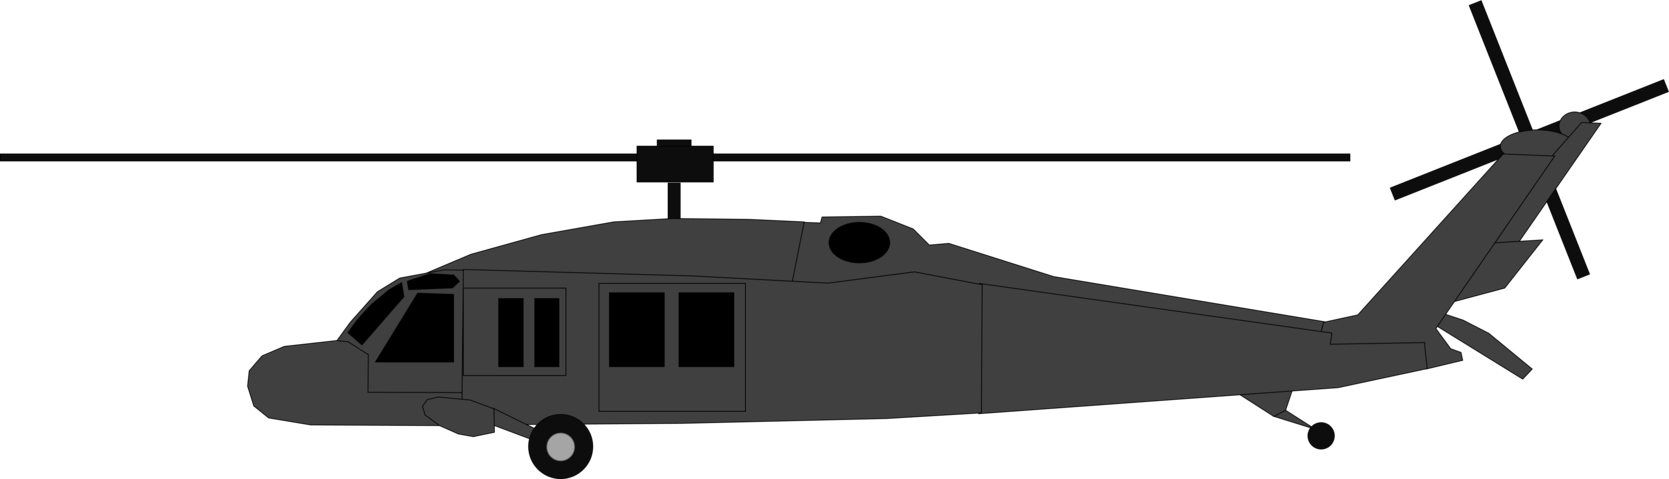 Odin Armed Forces - Bell Uh-1 Iroquois (1669x479)